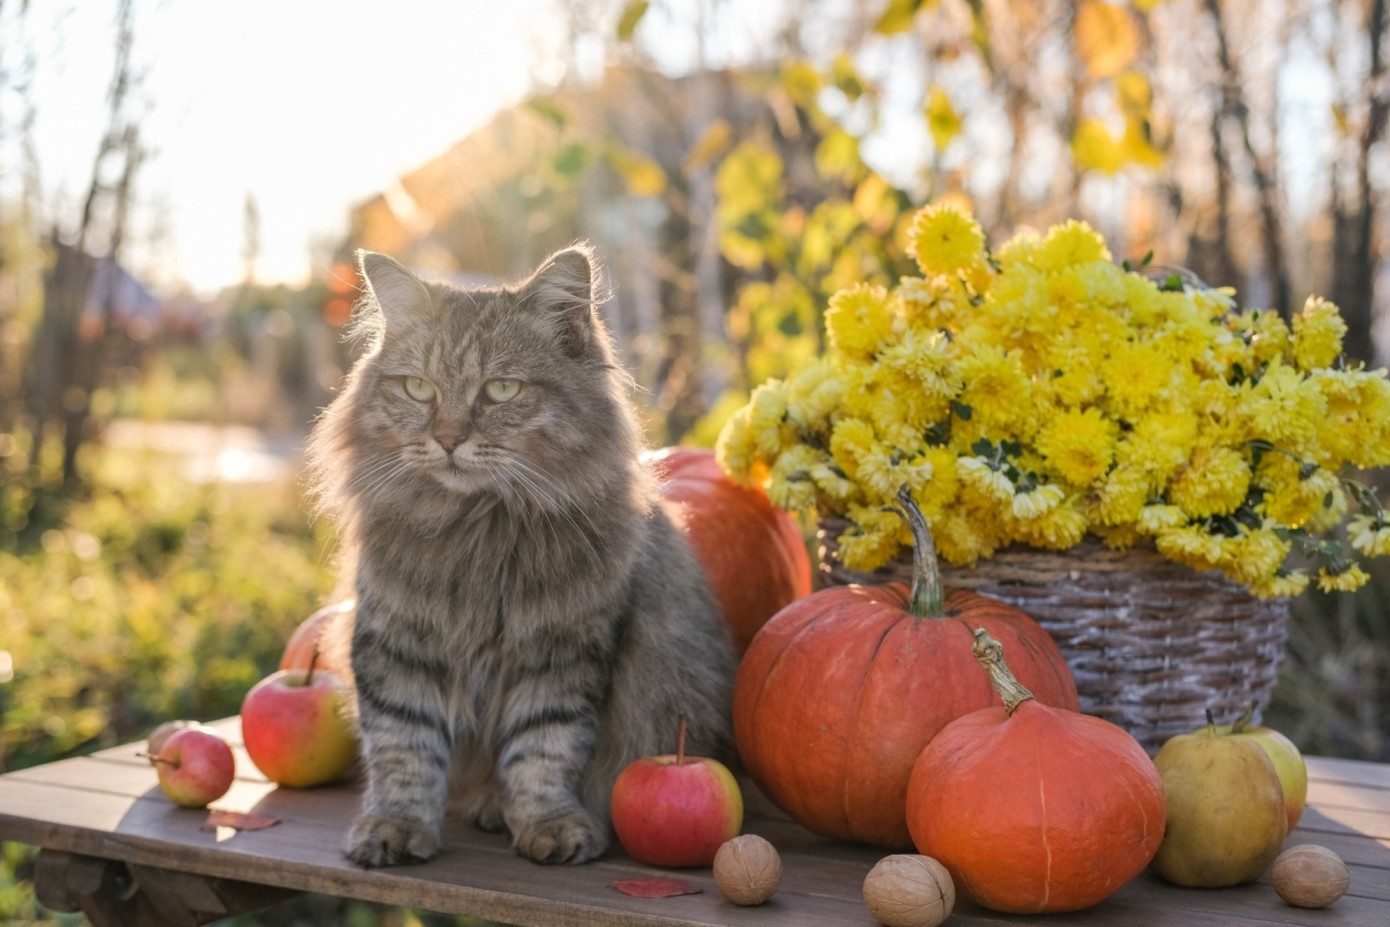 A cat sitting in a garden with pumpkins